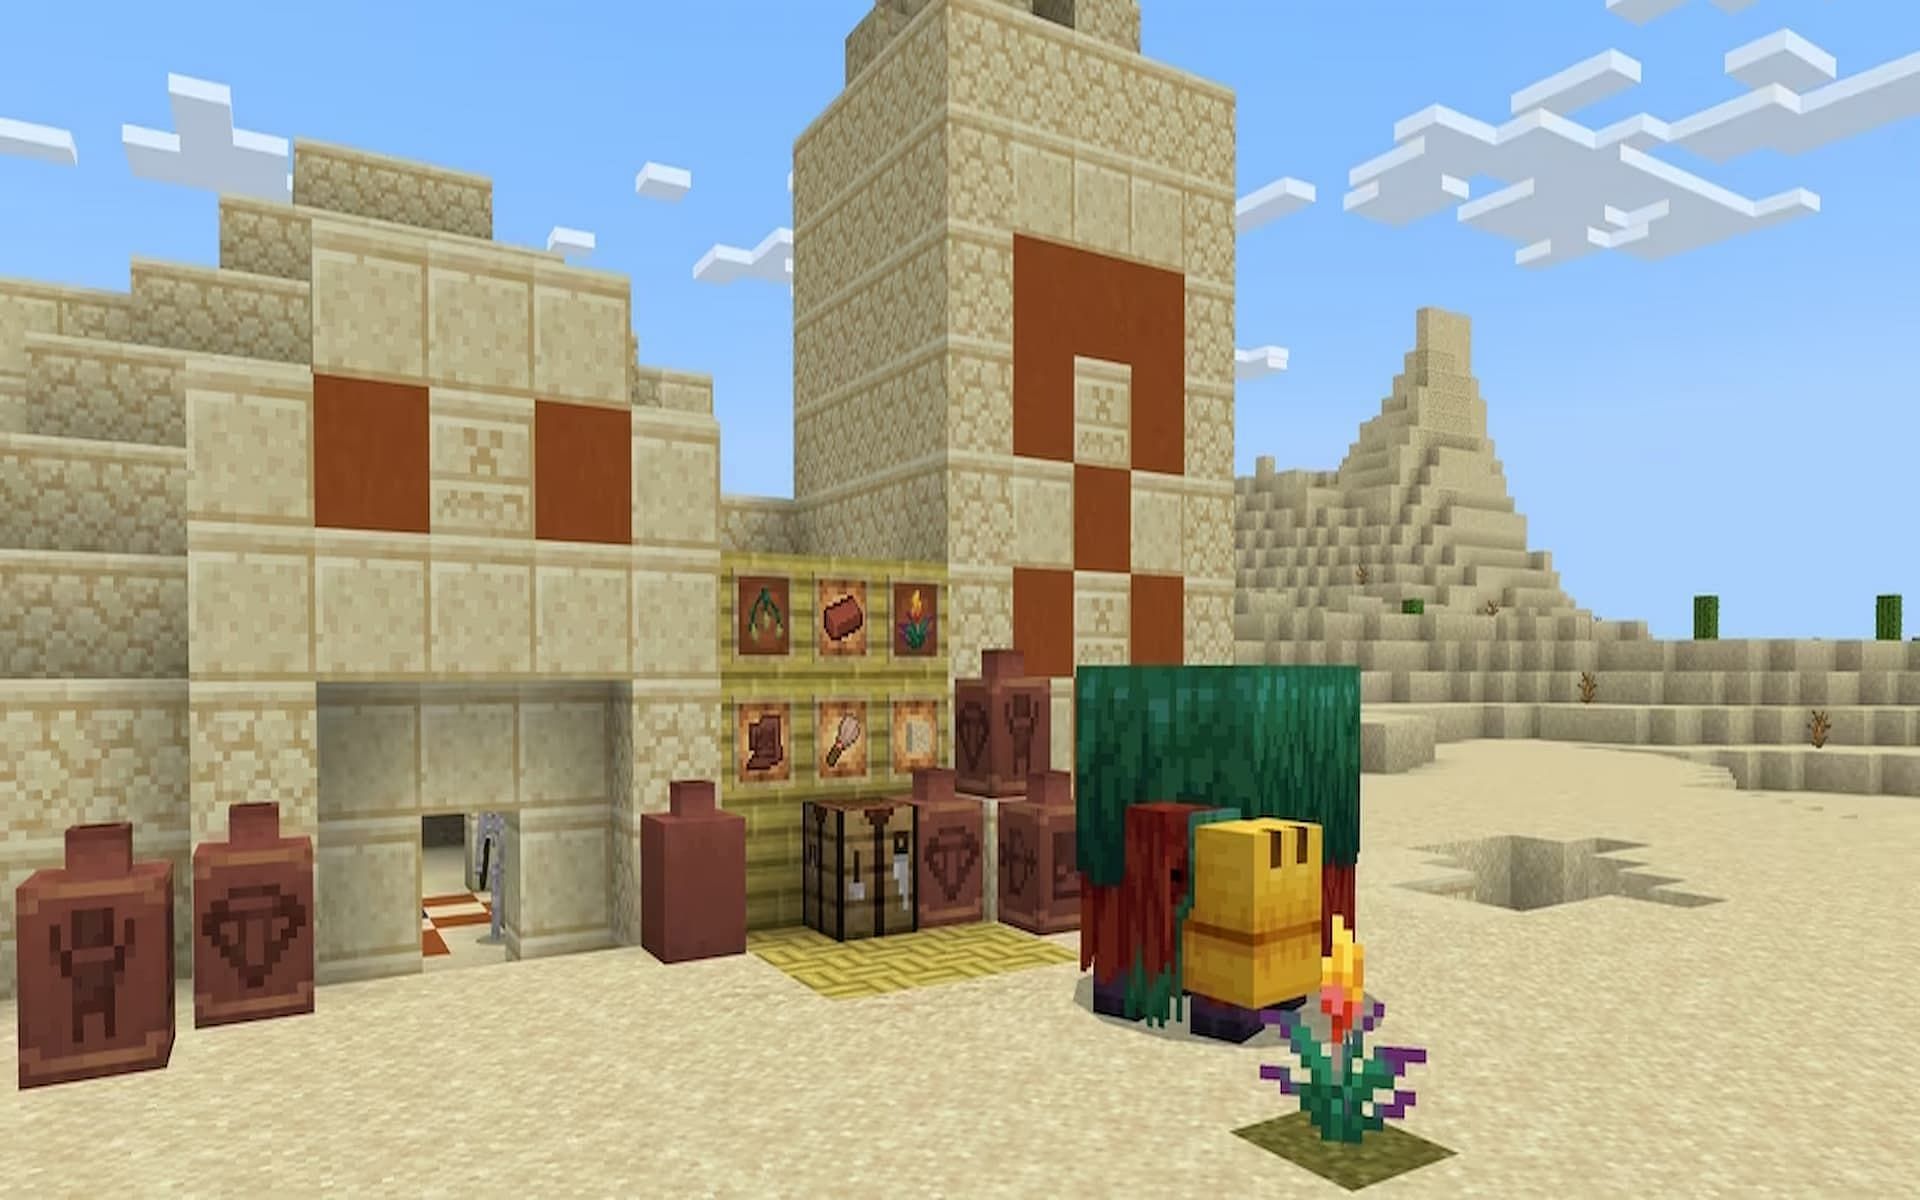 Players can download the Beta and Preview versions to experience a host of new features (Image via Minecraft.net)